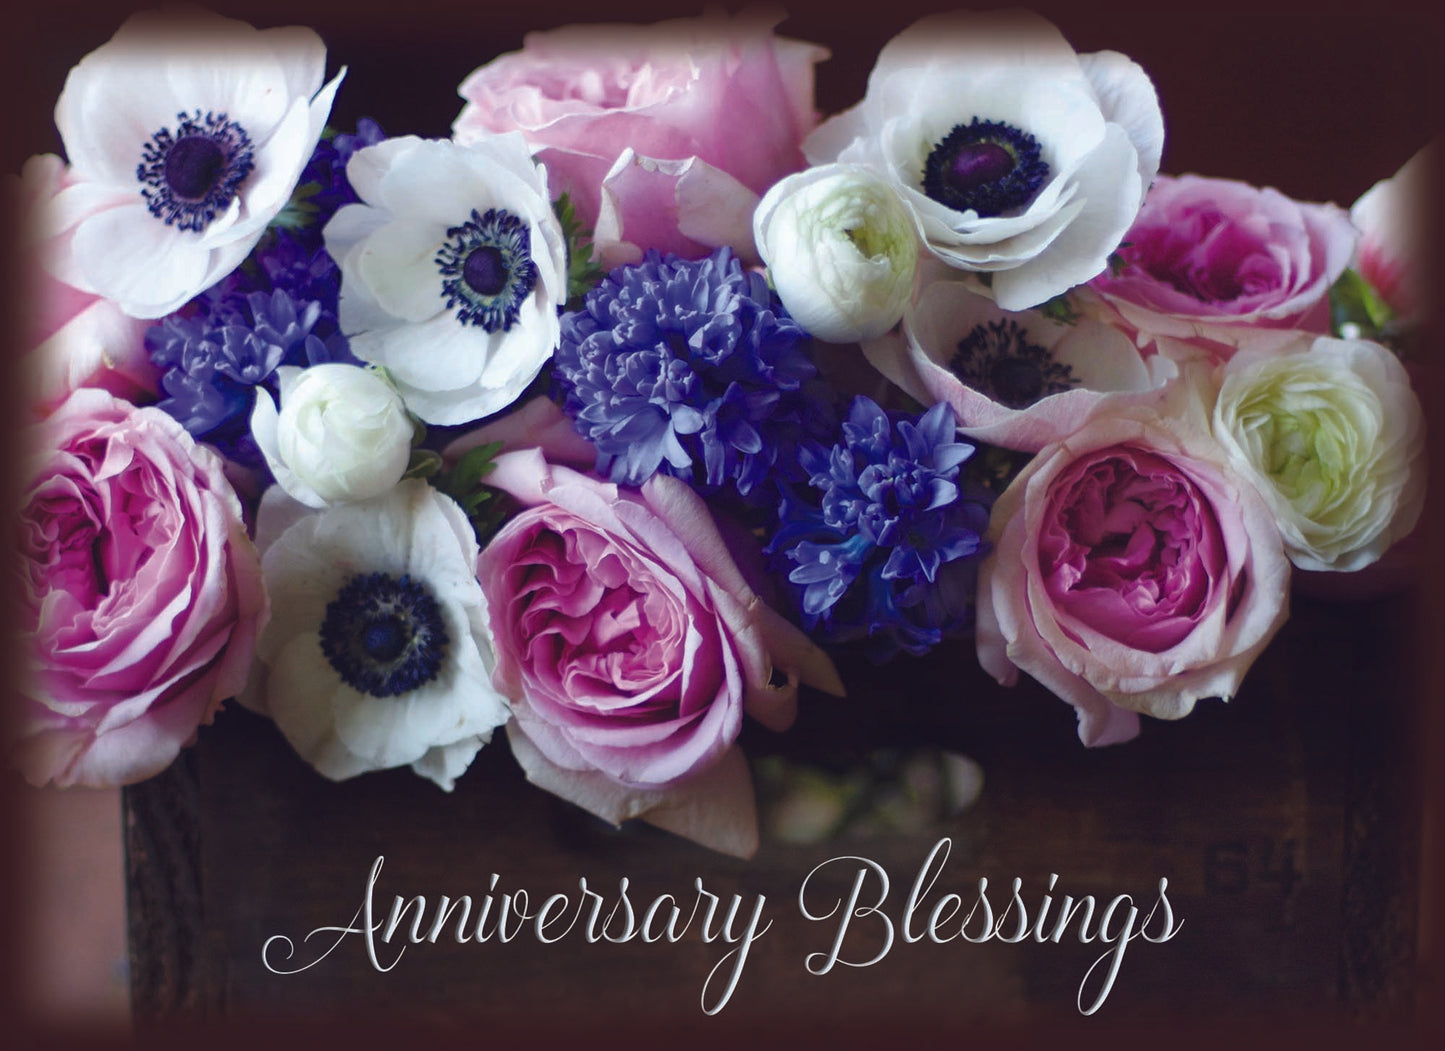 Boxed Anniversary Cards - Anniversary Blessings